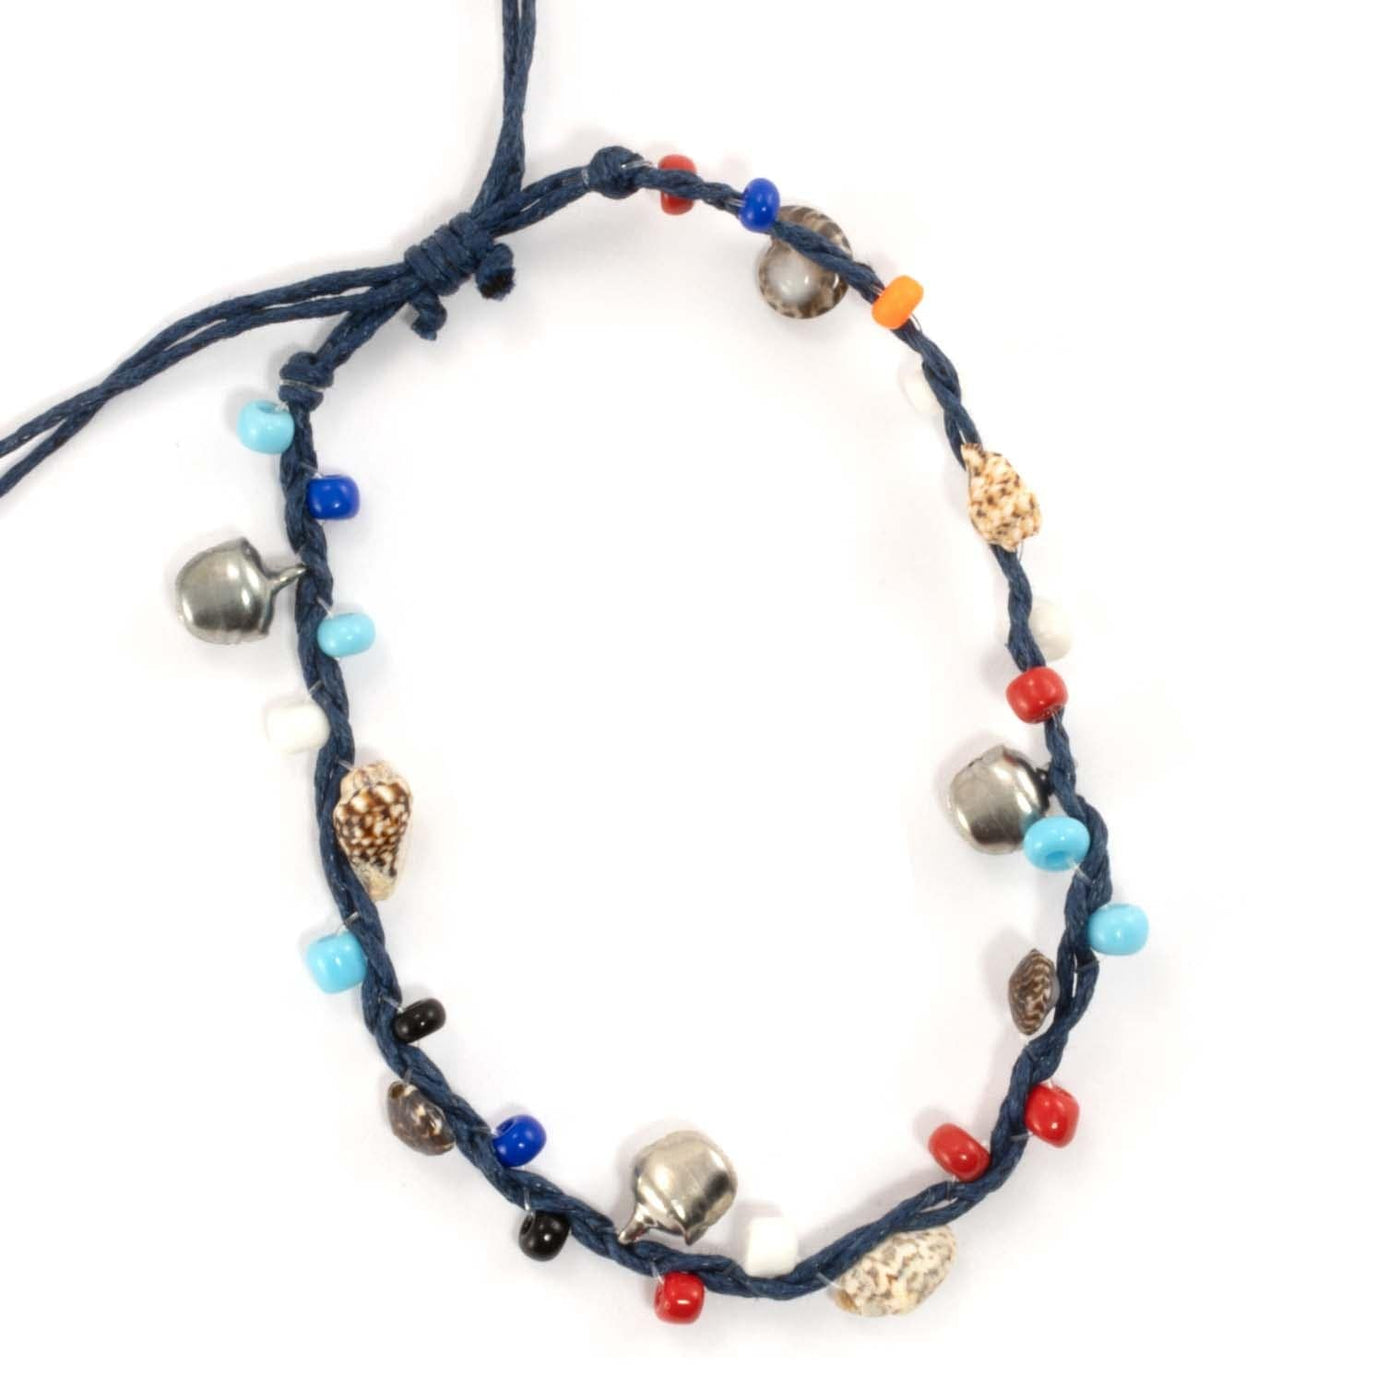 Colourful bead and charm anklet